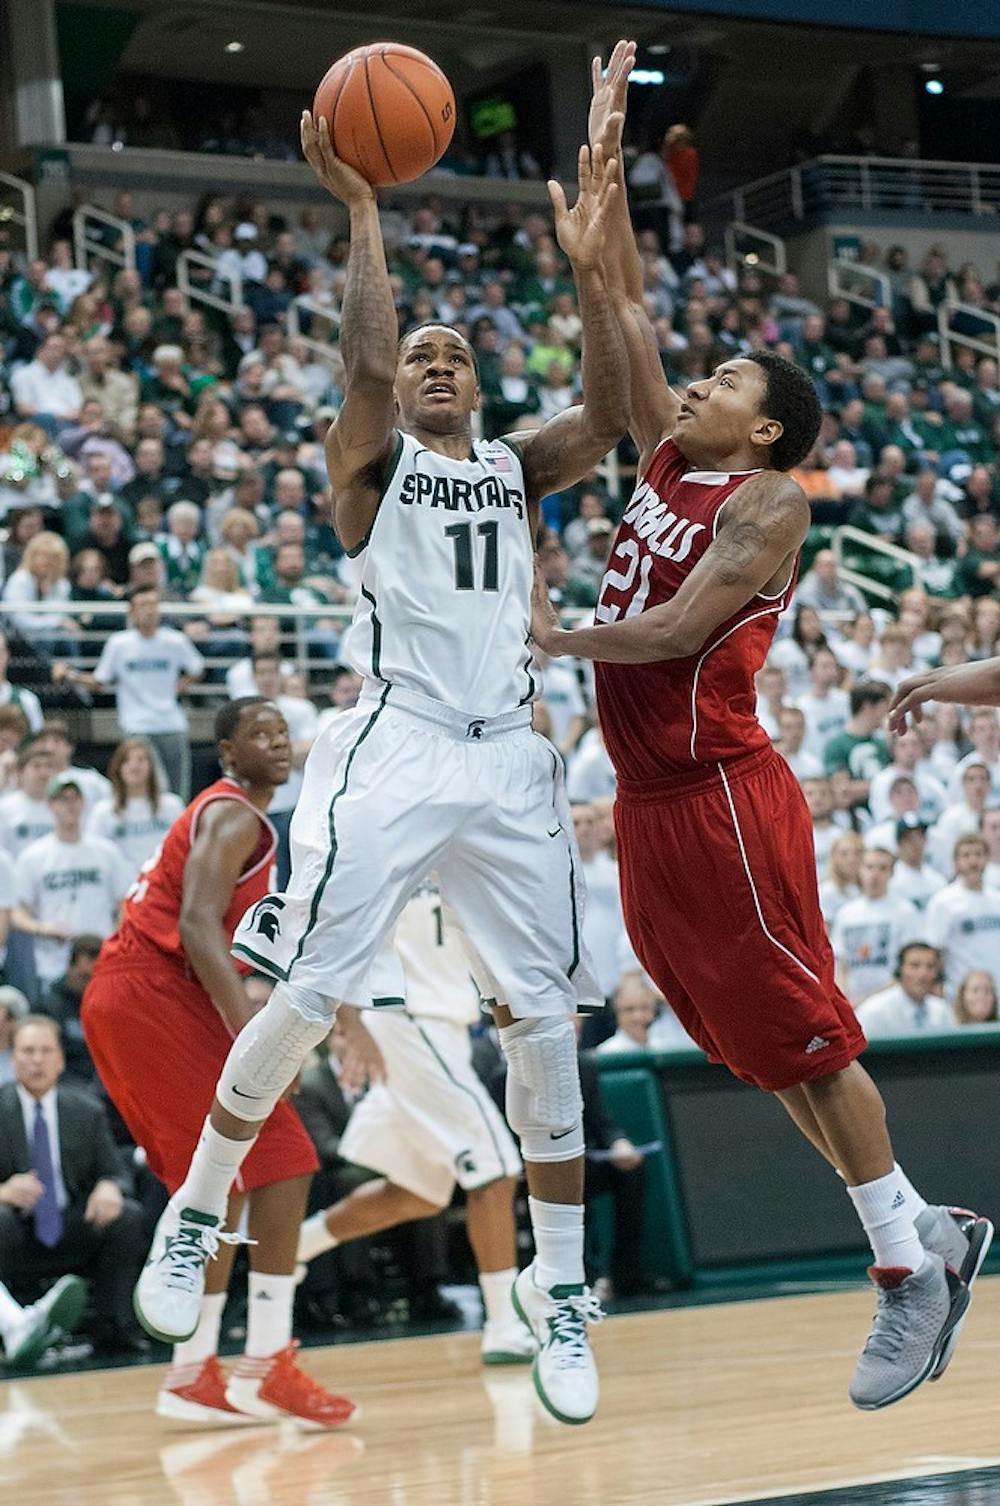 	<p>Junior guard Keith Appling goes up for a shot during the game against Nicholls State on Dec. 1, 2012, at Breslin Center. Appling was the leading scorer for the Spartans with a total of 13 points, helping them beat the Colonels 84-39. Natalie Kolb/The State News</p>